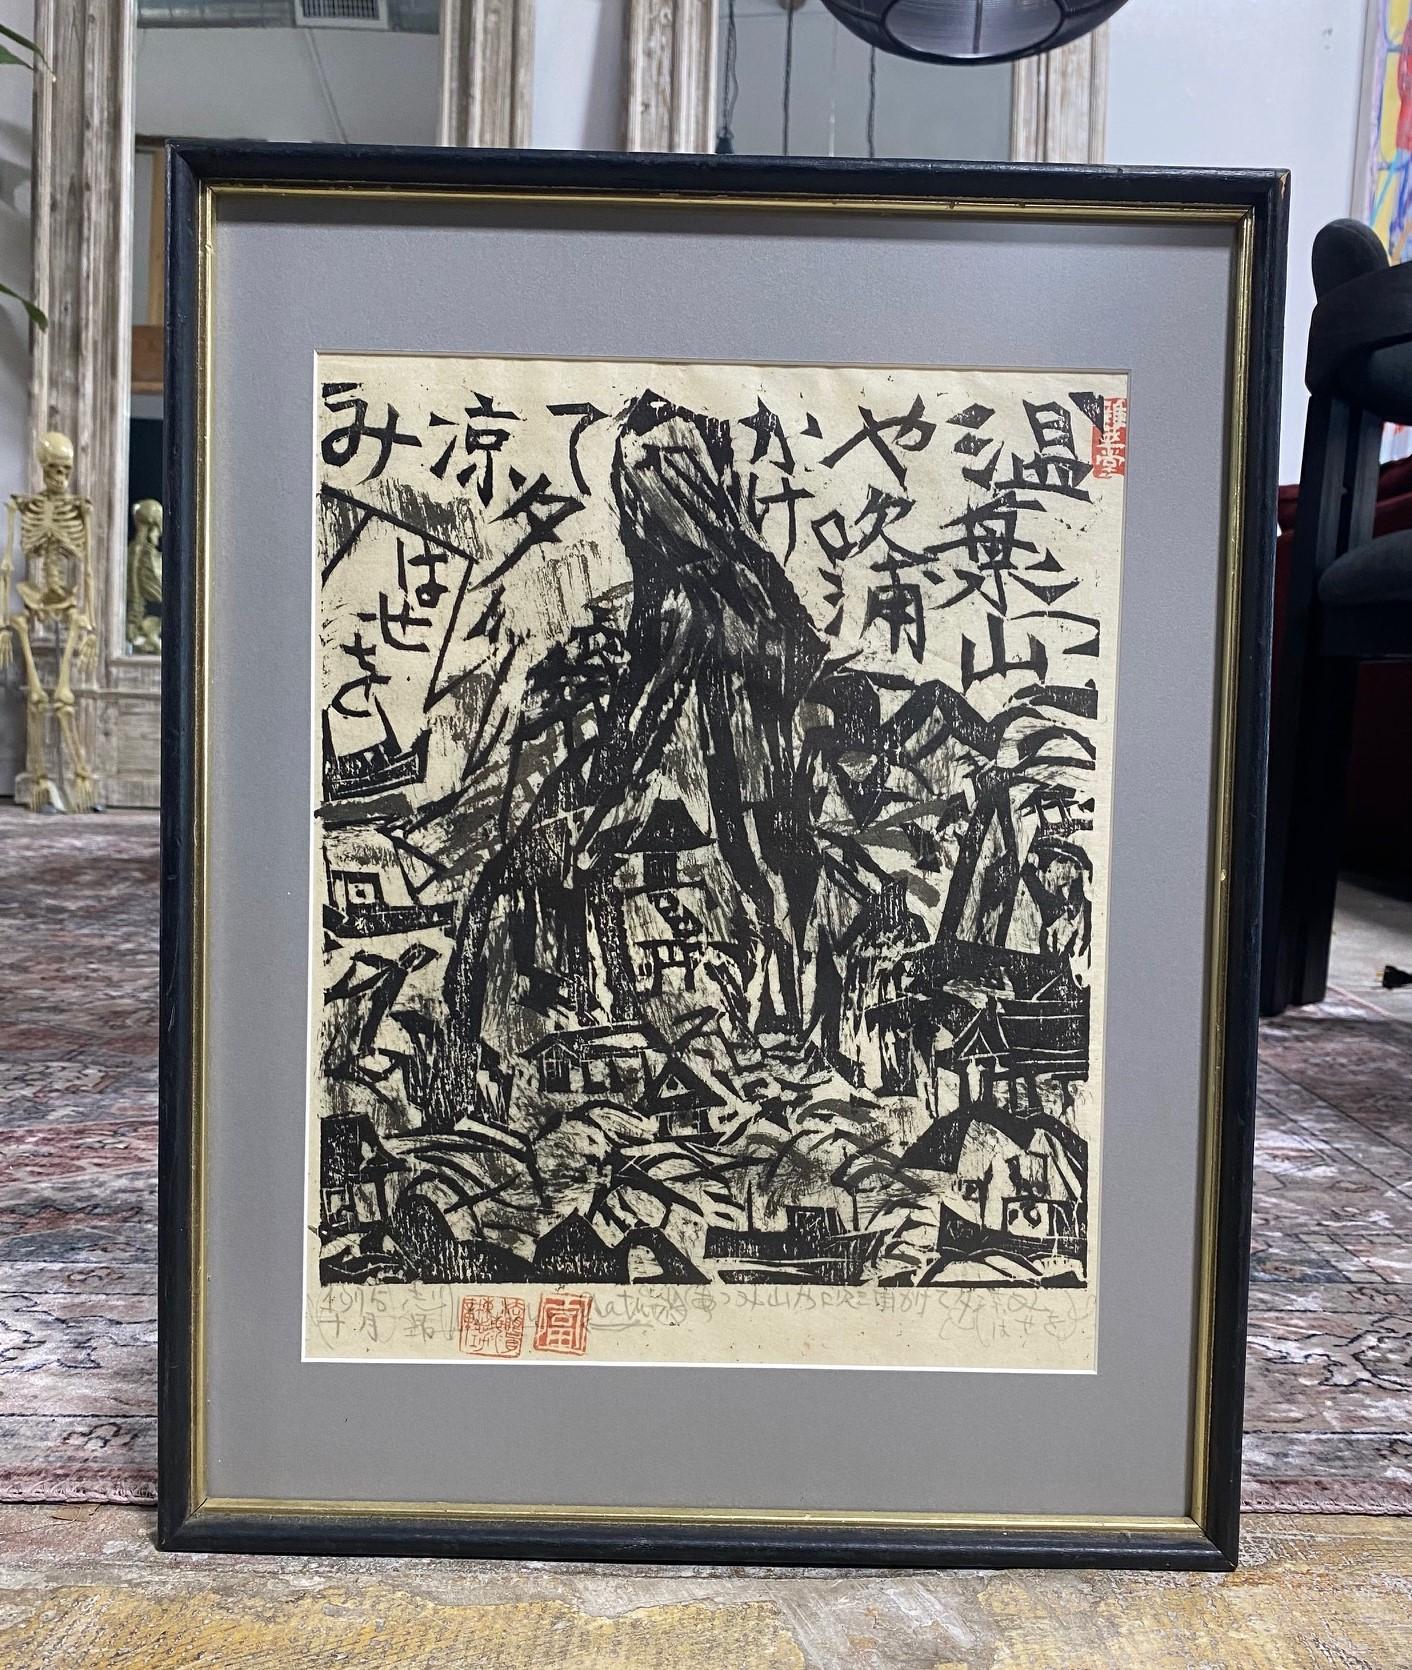 A wonderful Mingei woodblock print by famed Japanese master Showa era printer/ artist Shiko Munakata who was widely considered to have been the Pablo Picasso of Japan. Munakata was associated with the Sosaku-hanga movement and the mingei (Folk Art)